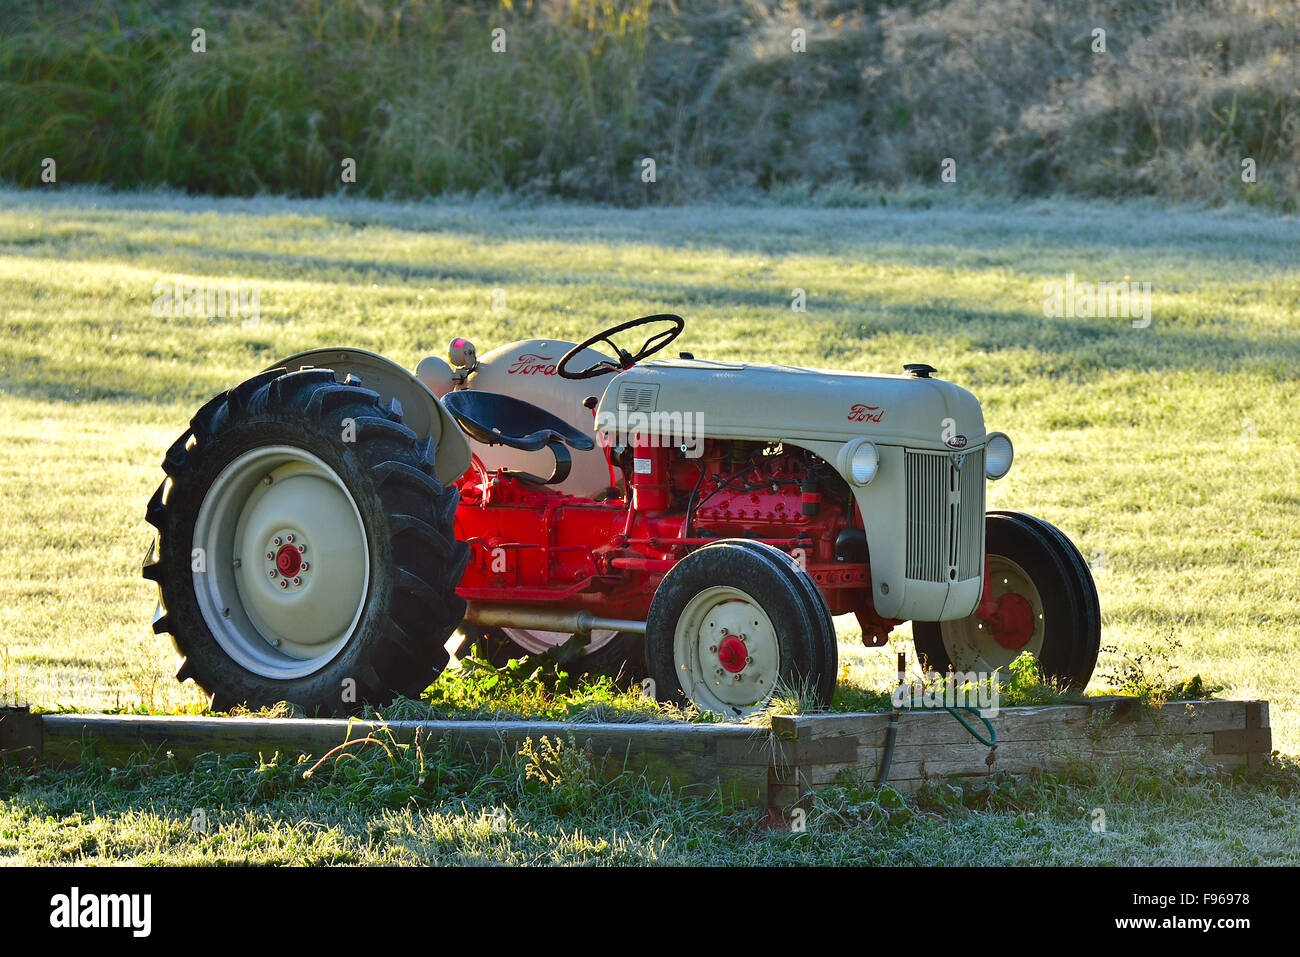 A vintage Ford farm tractor on display in a rural farm field in the early morning light near Sussex New Brunswick Canada. Stock Photo